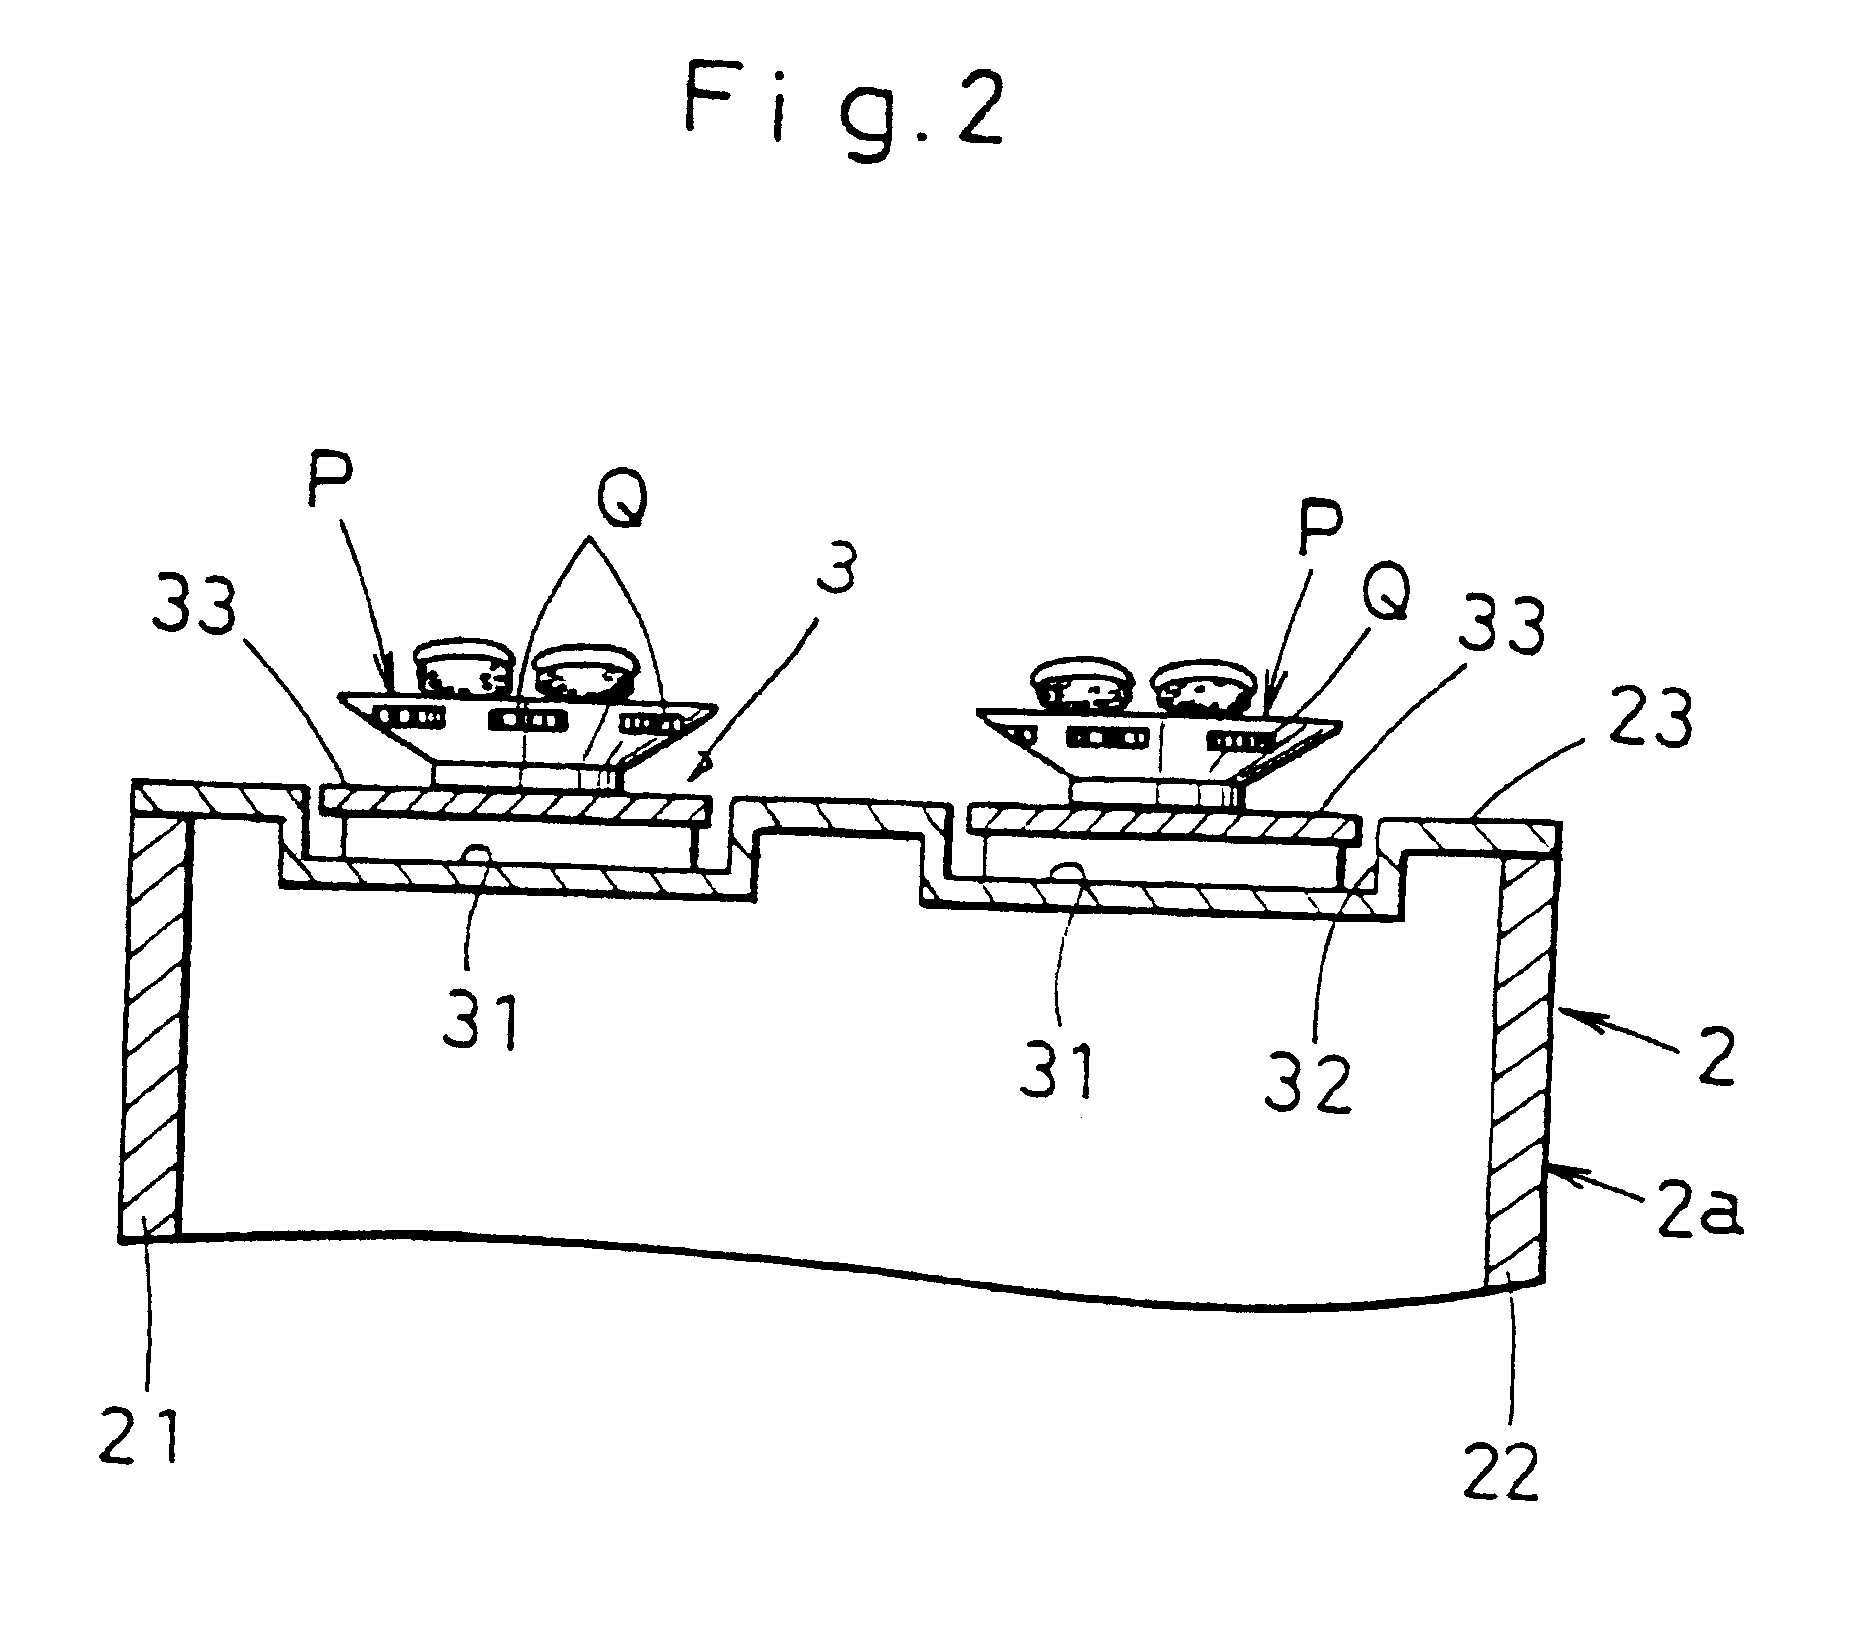 Food and drink conveying system